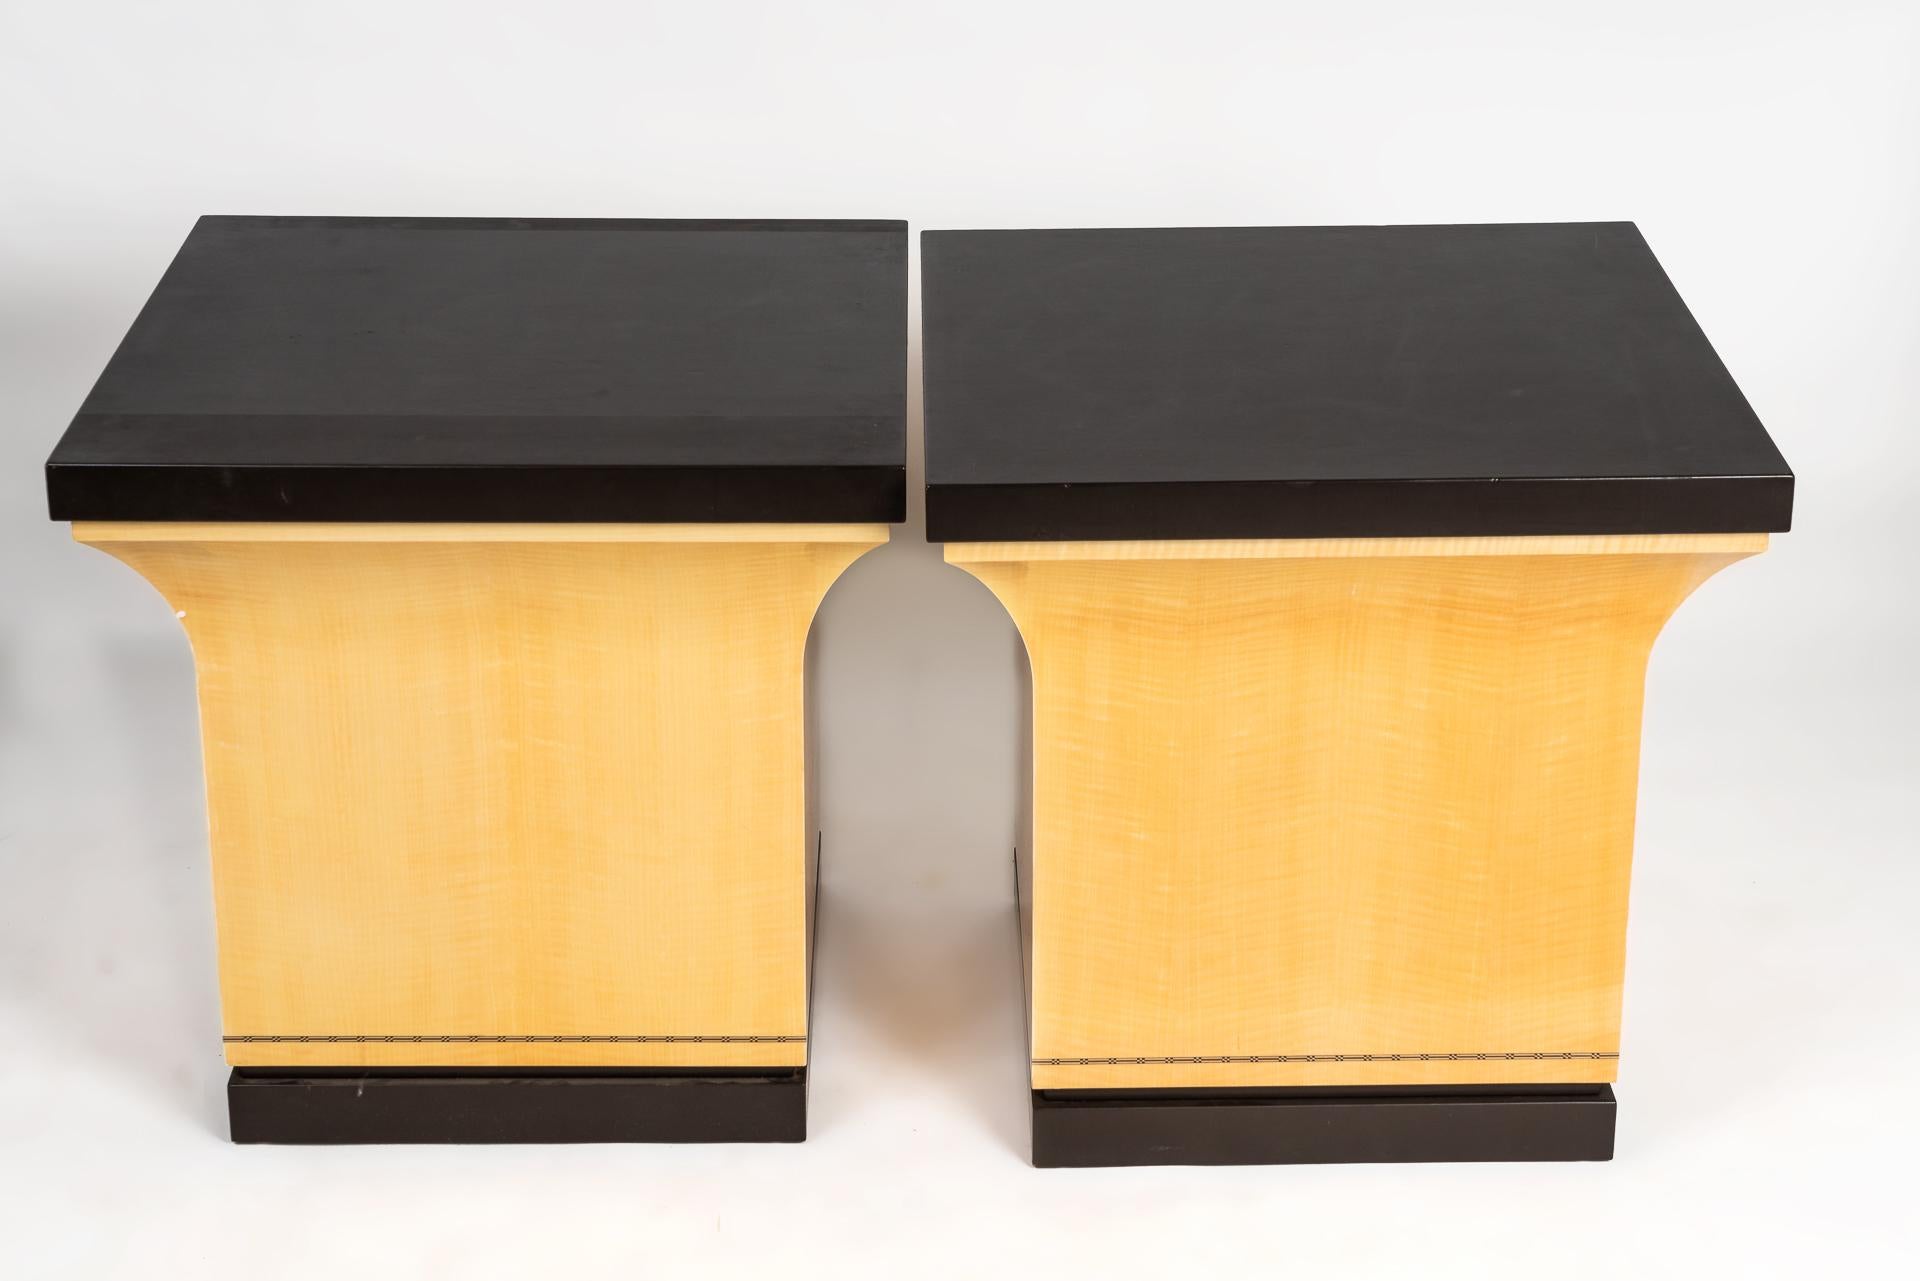 These two beautiful crafted pedestal which have been produced by Karl Spinger Ltd., have a Anigre- Wood Veneer and the base and top is covered in dark Leather. At the lower part of the pedestal you find a detailed Line of intarsia.

The pedestal